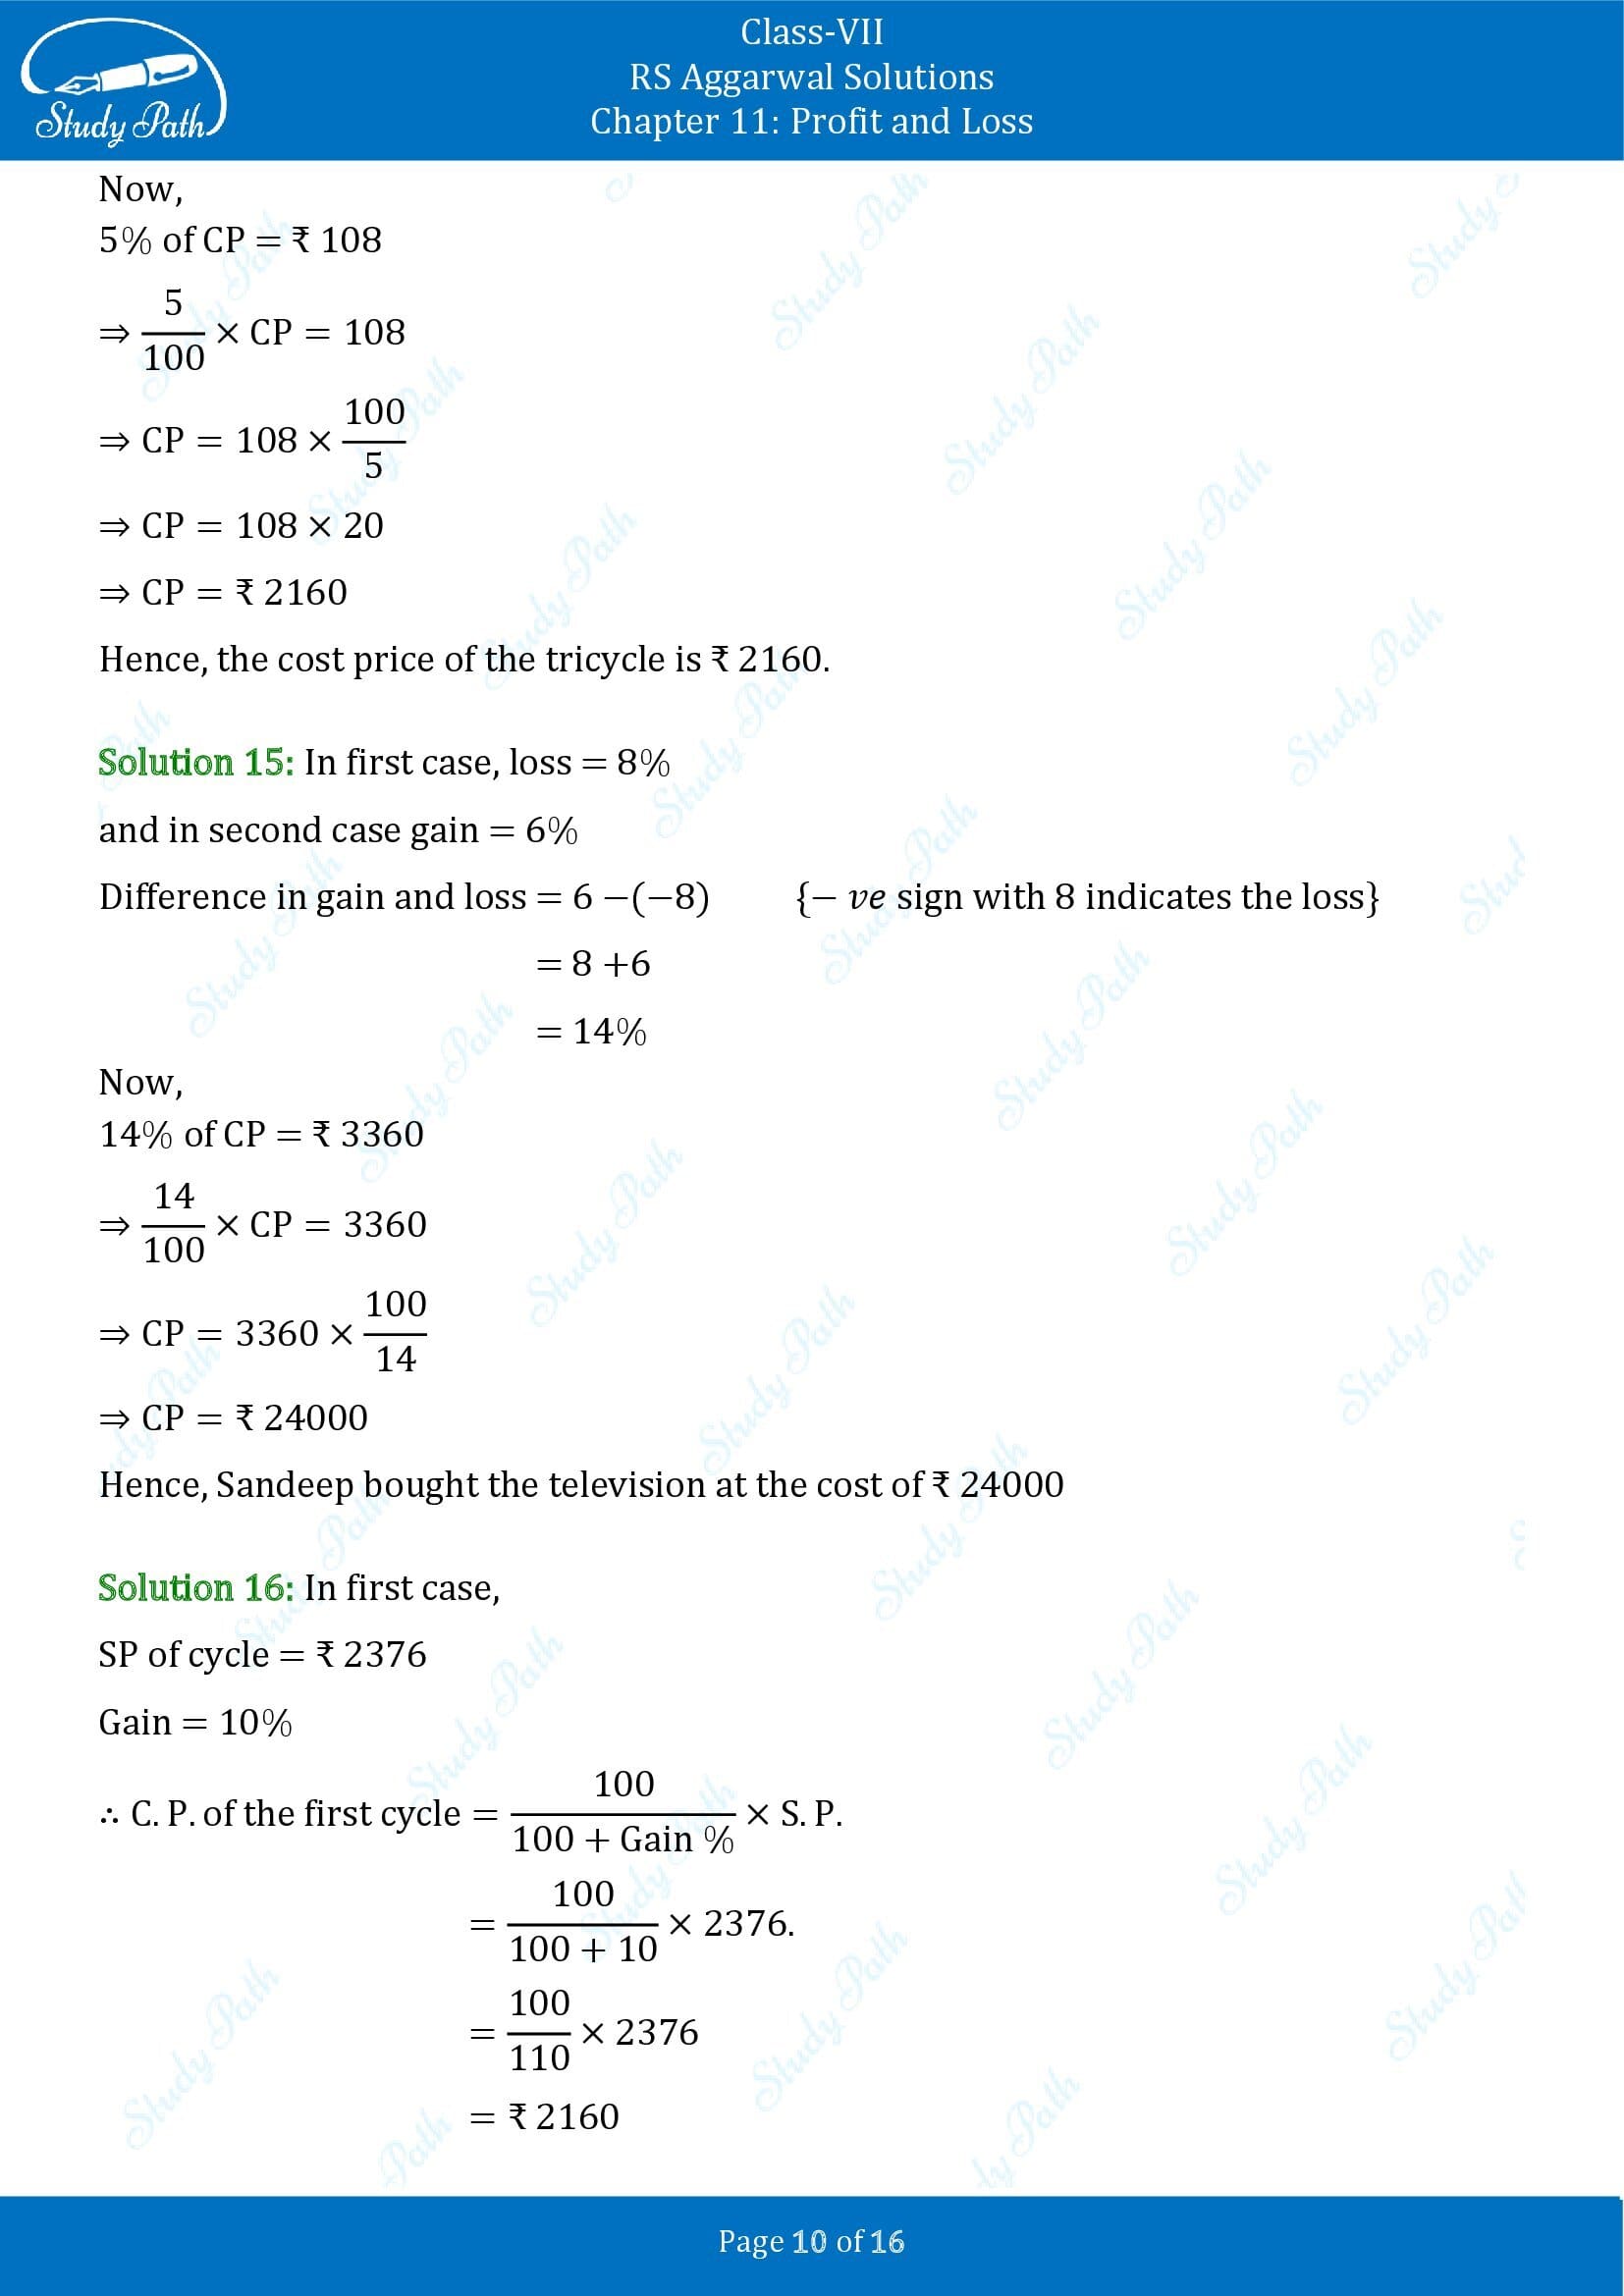 RS Aggarwal Solutions Class 7 Chapter 11 Profit and Loss Exercise 11A 00010